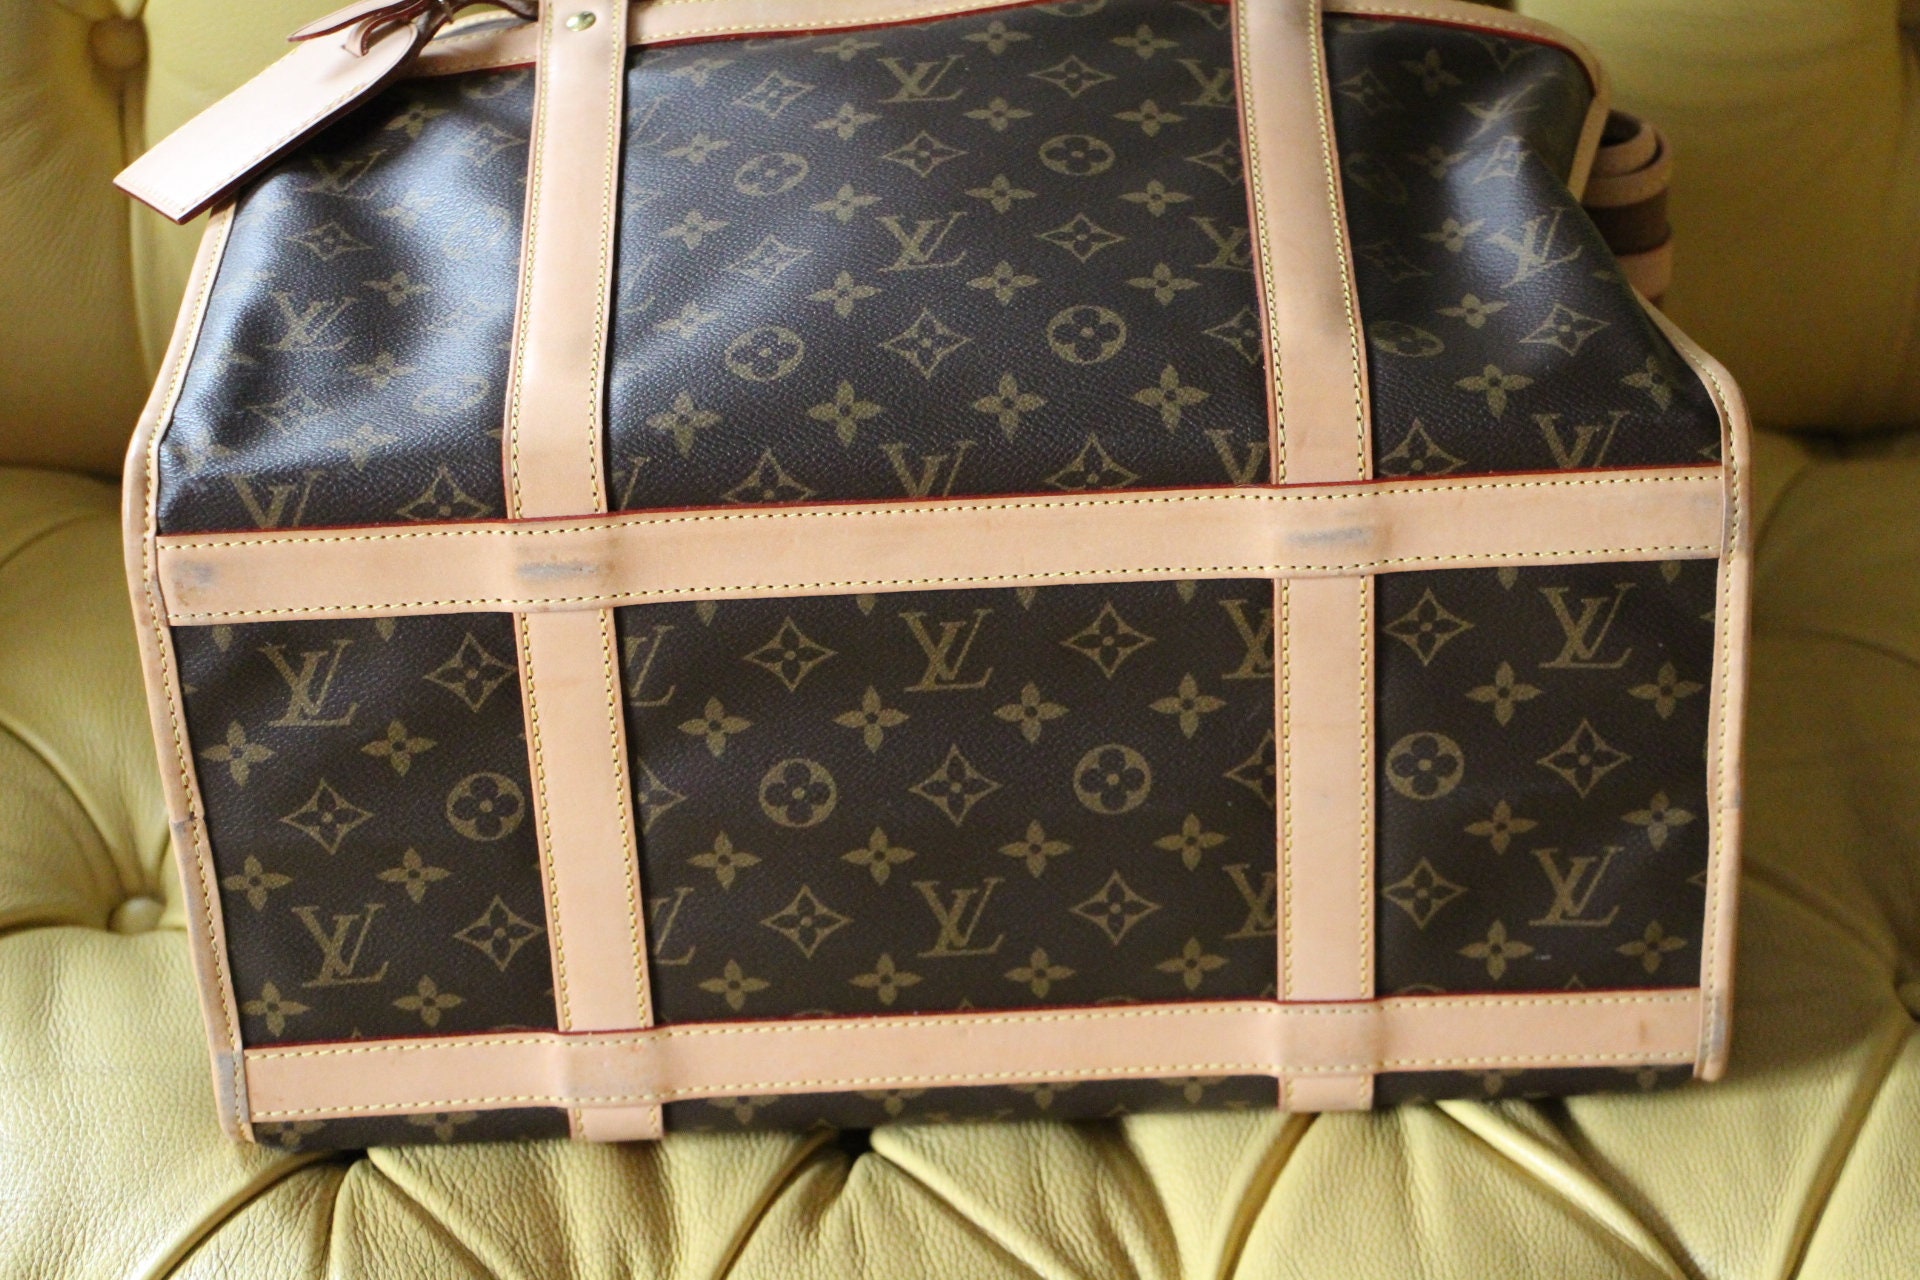 Louis Vuitton Dog Carriers & Totes